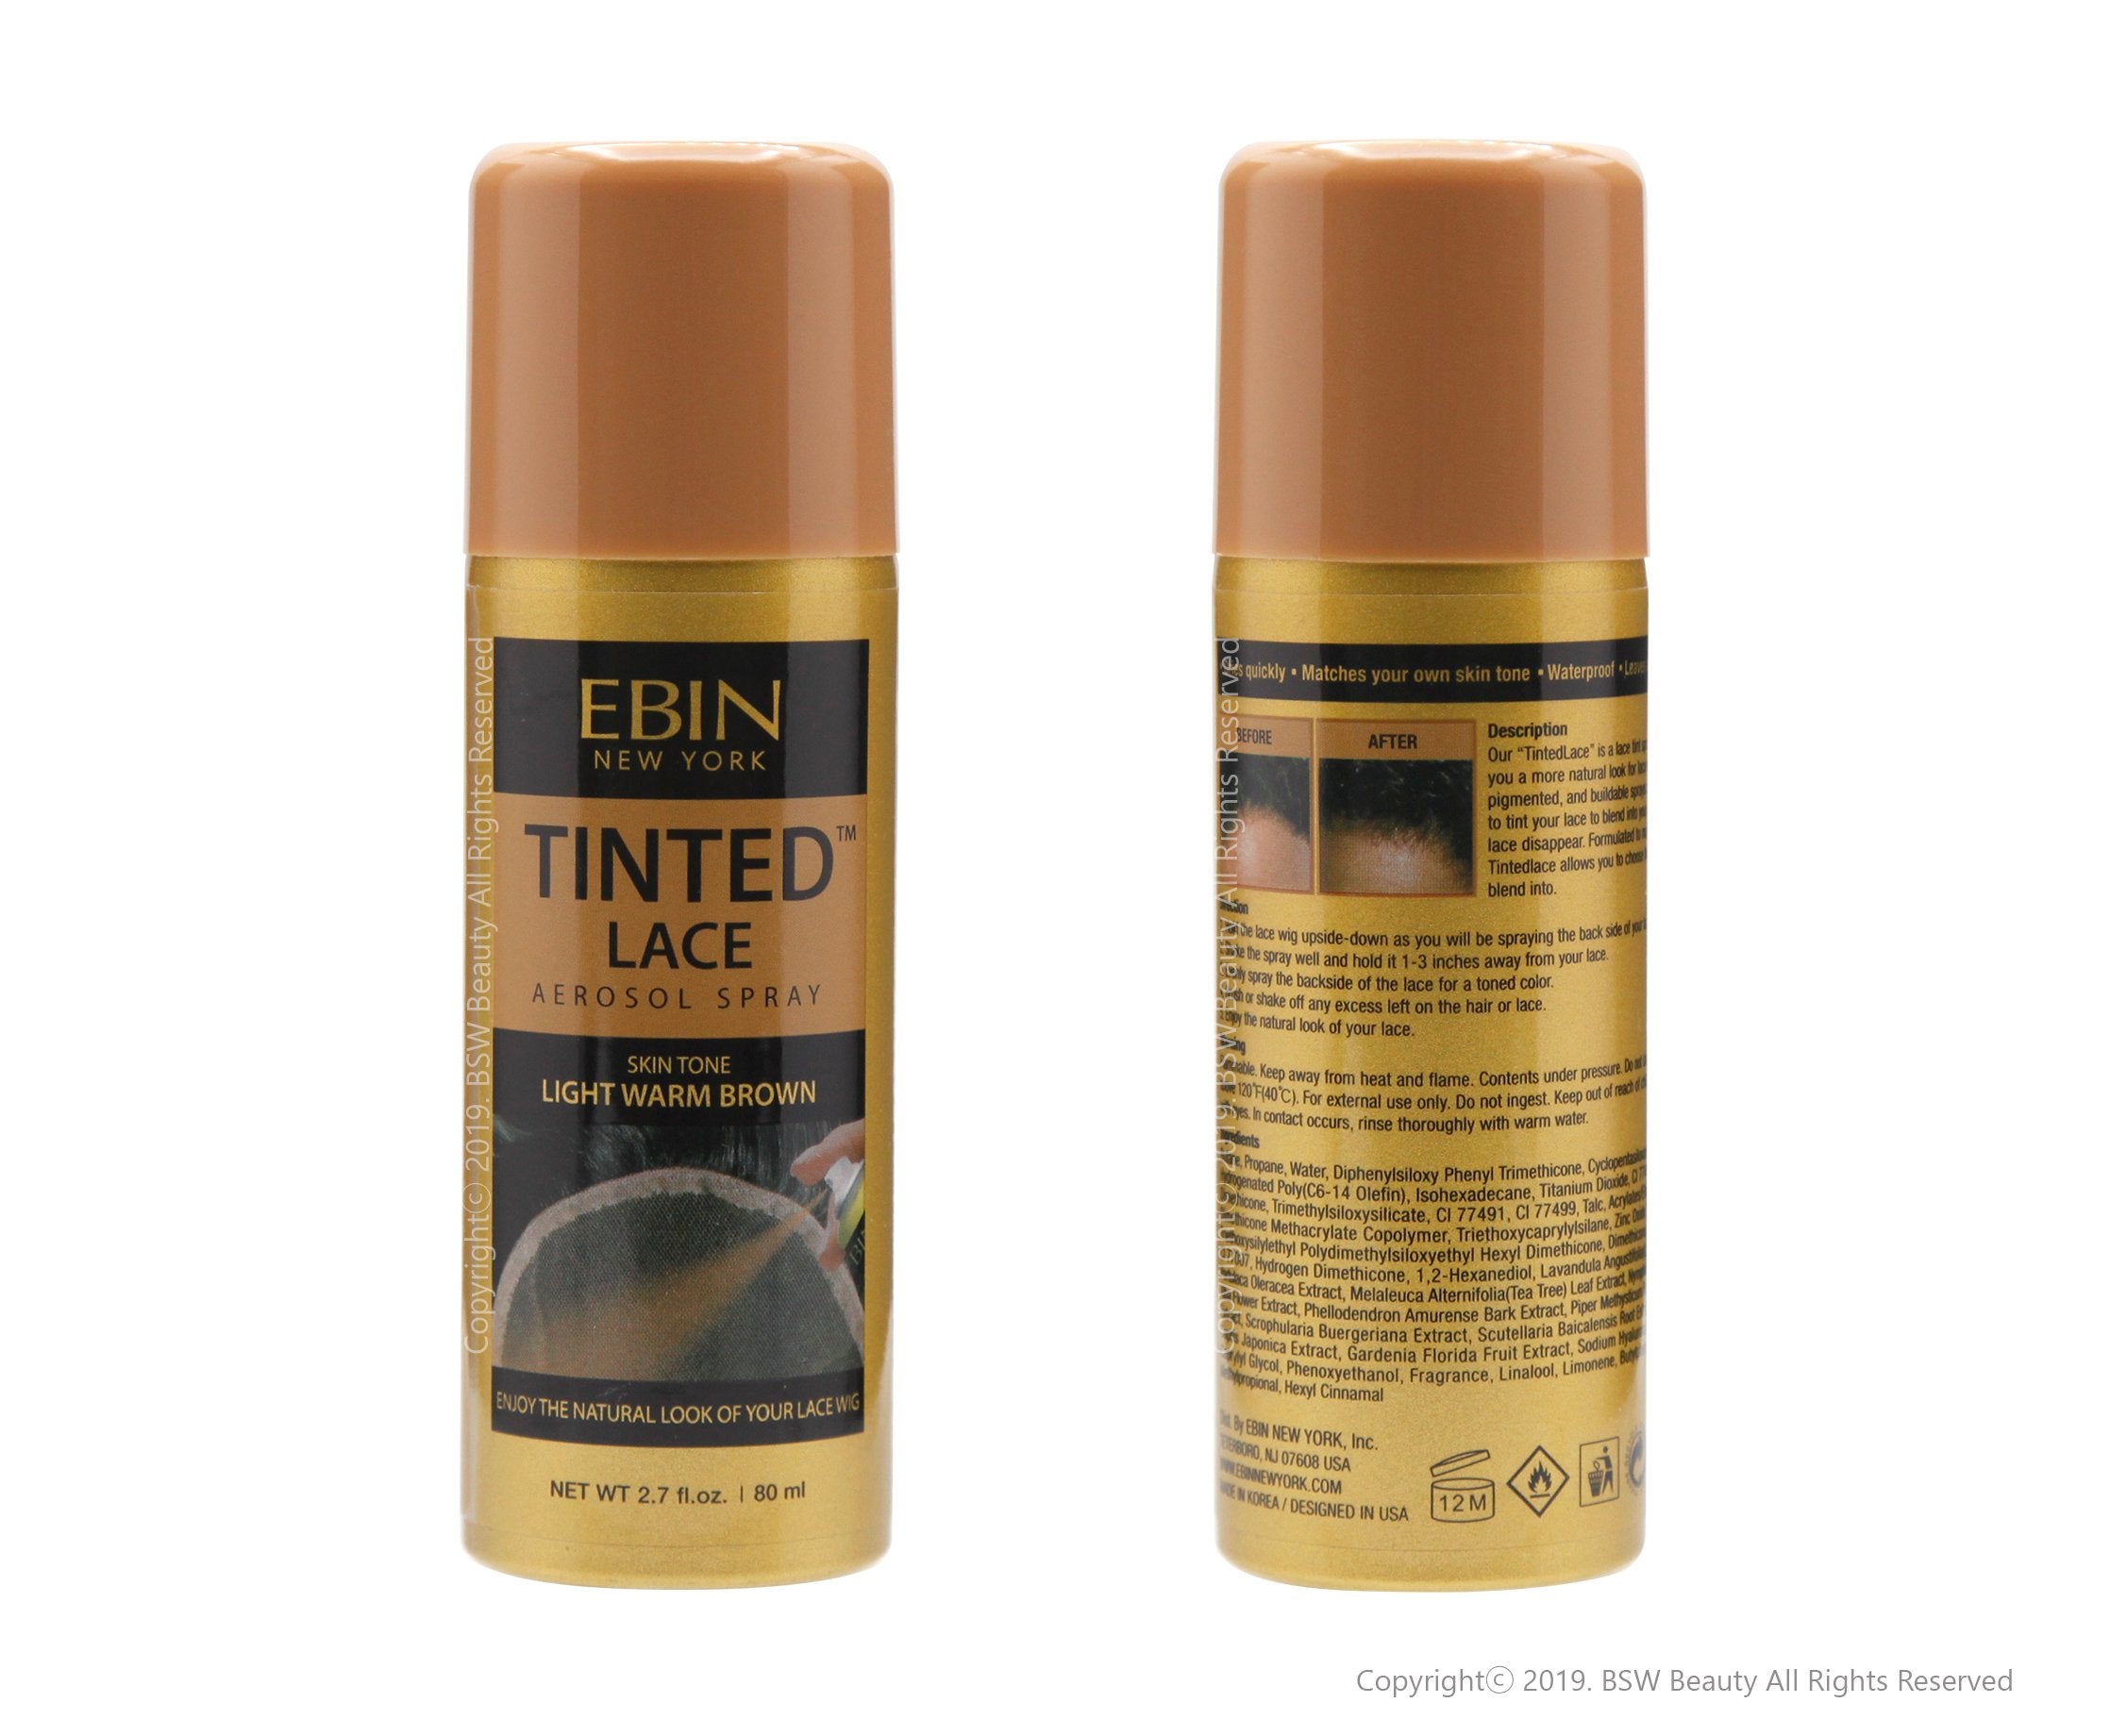 12 EBIN Tinted Lace Aerosol Spray for Lace Wigs Light Warm Brown 2.7 oz